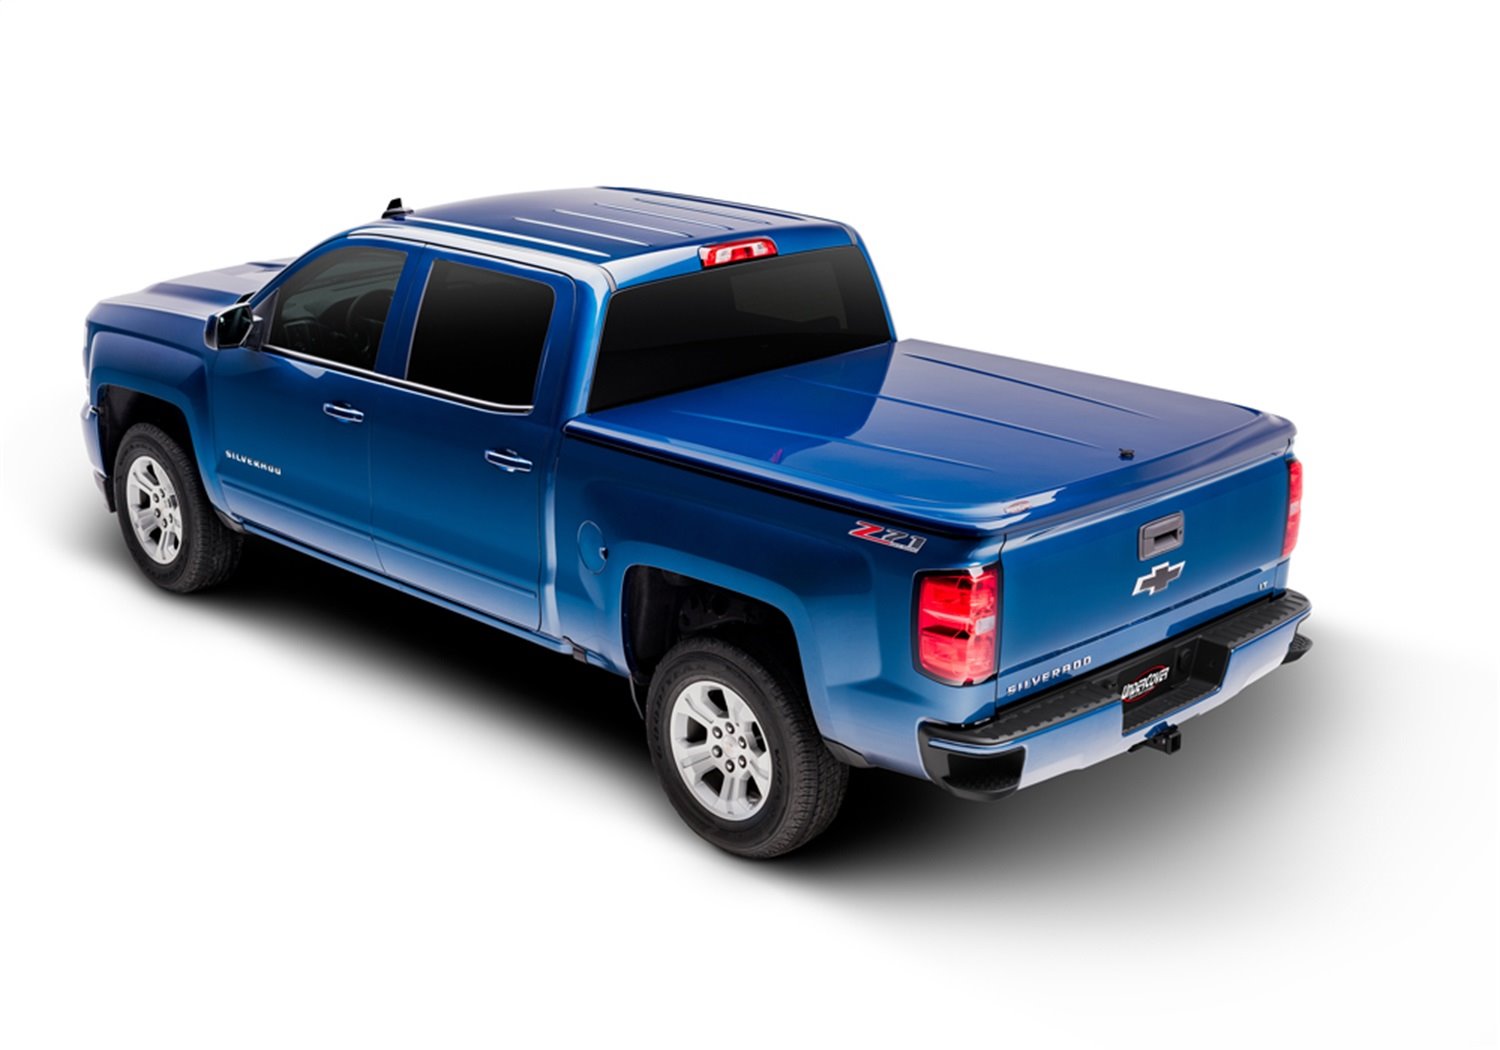 UC2186L-G1 LUX Hard Non-Folding Cover, Fits Select Ford Ranger 5'Bed, G1 Shadow Black